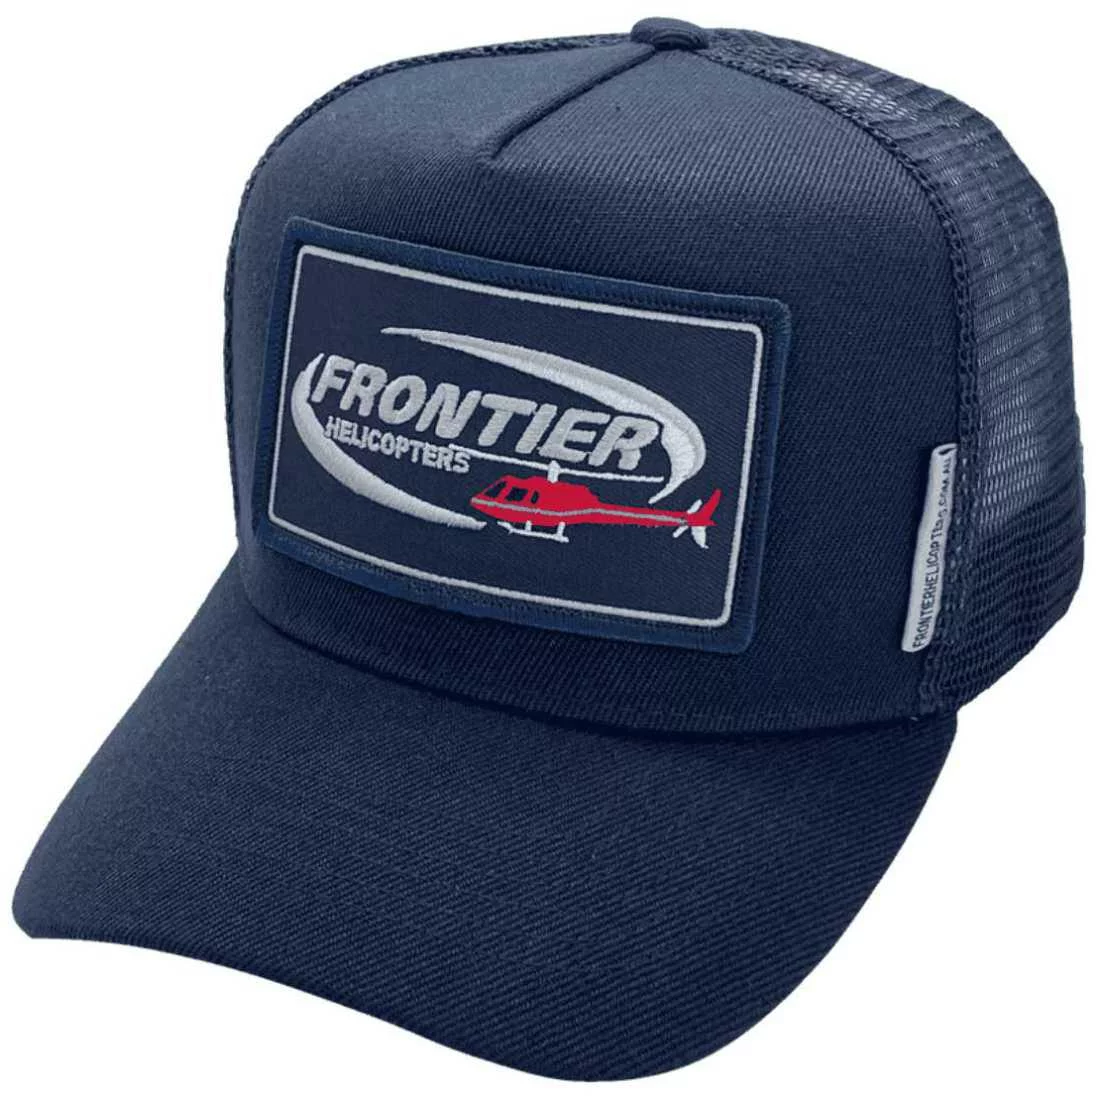 Frontier Helicopters Derby WA HP Original Basic Aussie Trucker Hats snapback with optional NO sidebands Exclusive Australian Head Fit with sewn-on embroidered badge